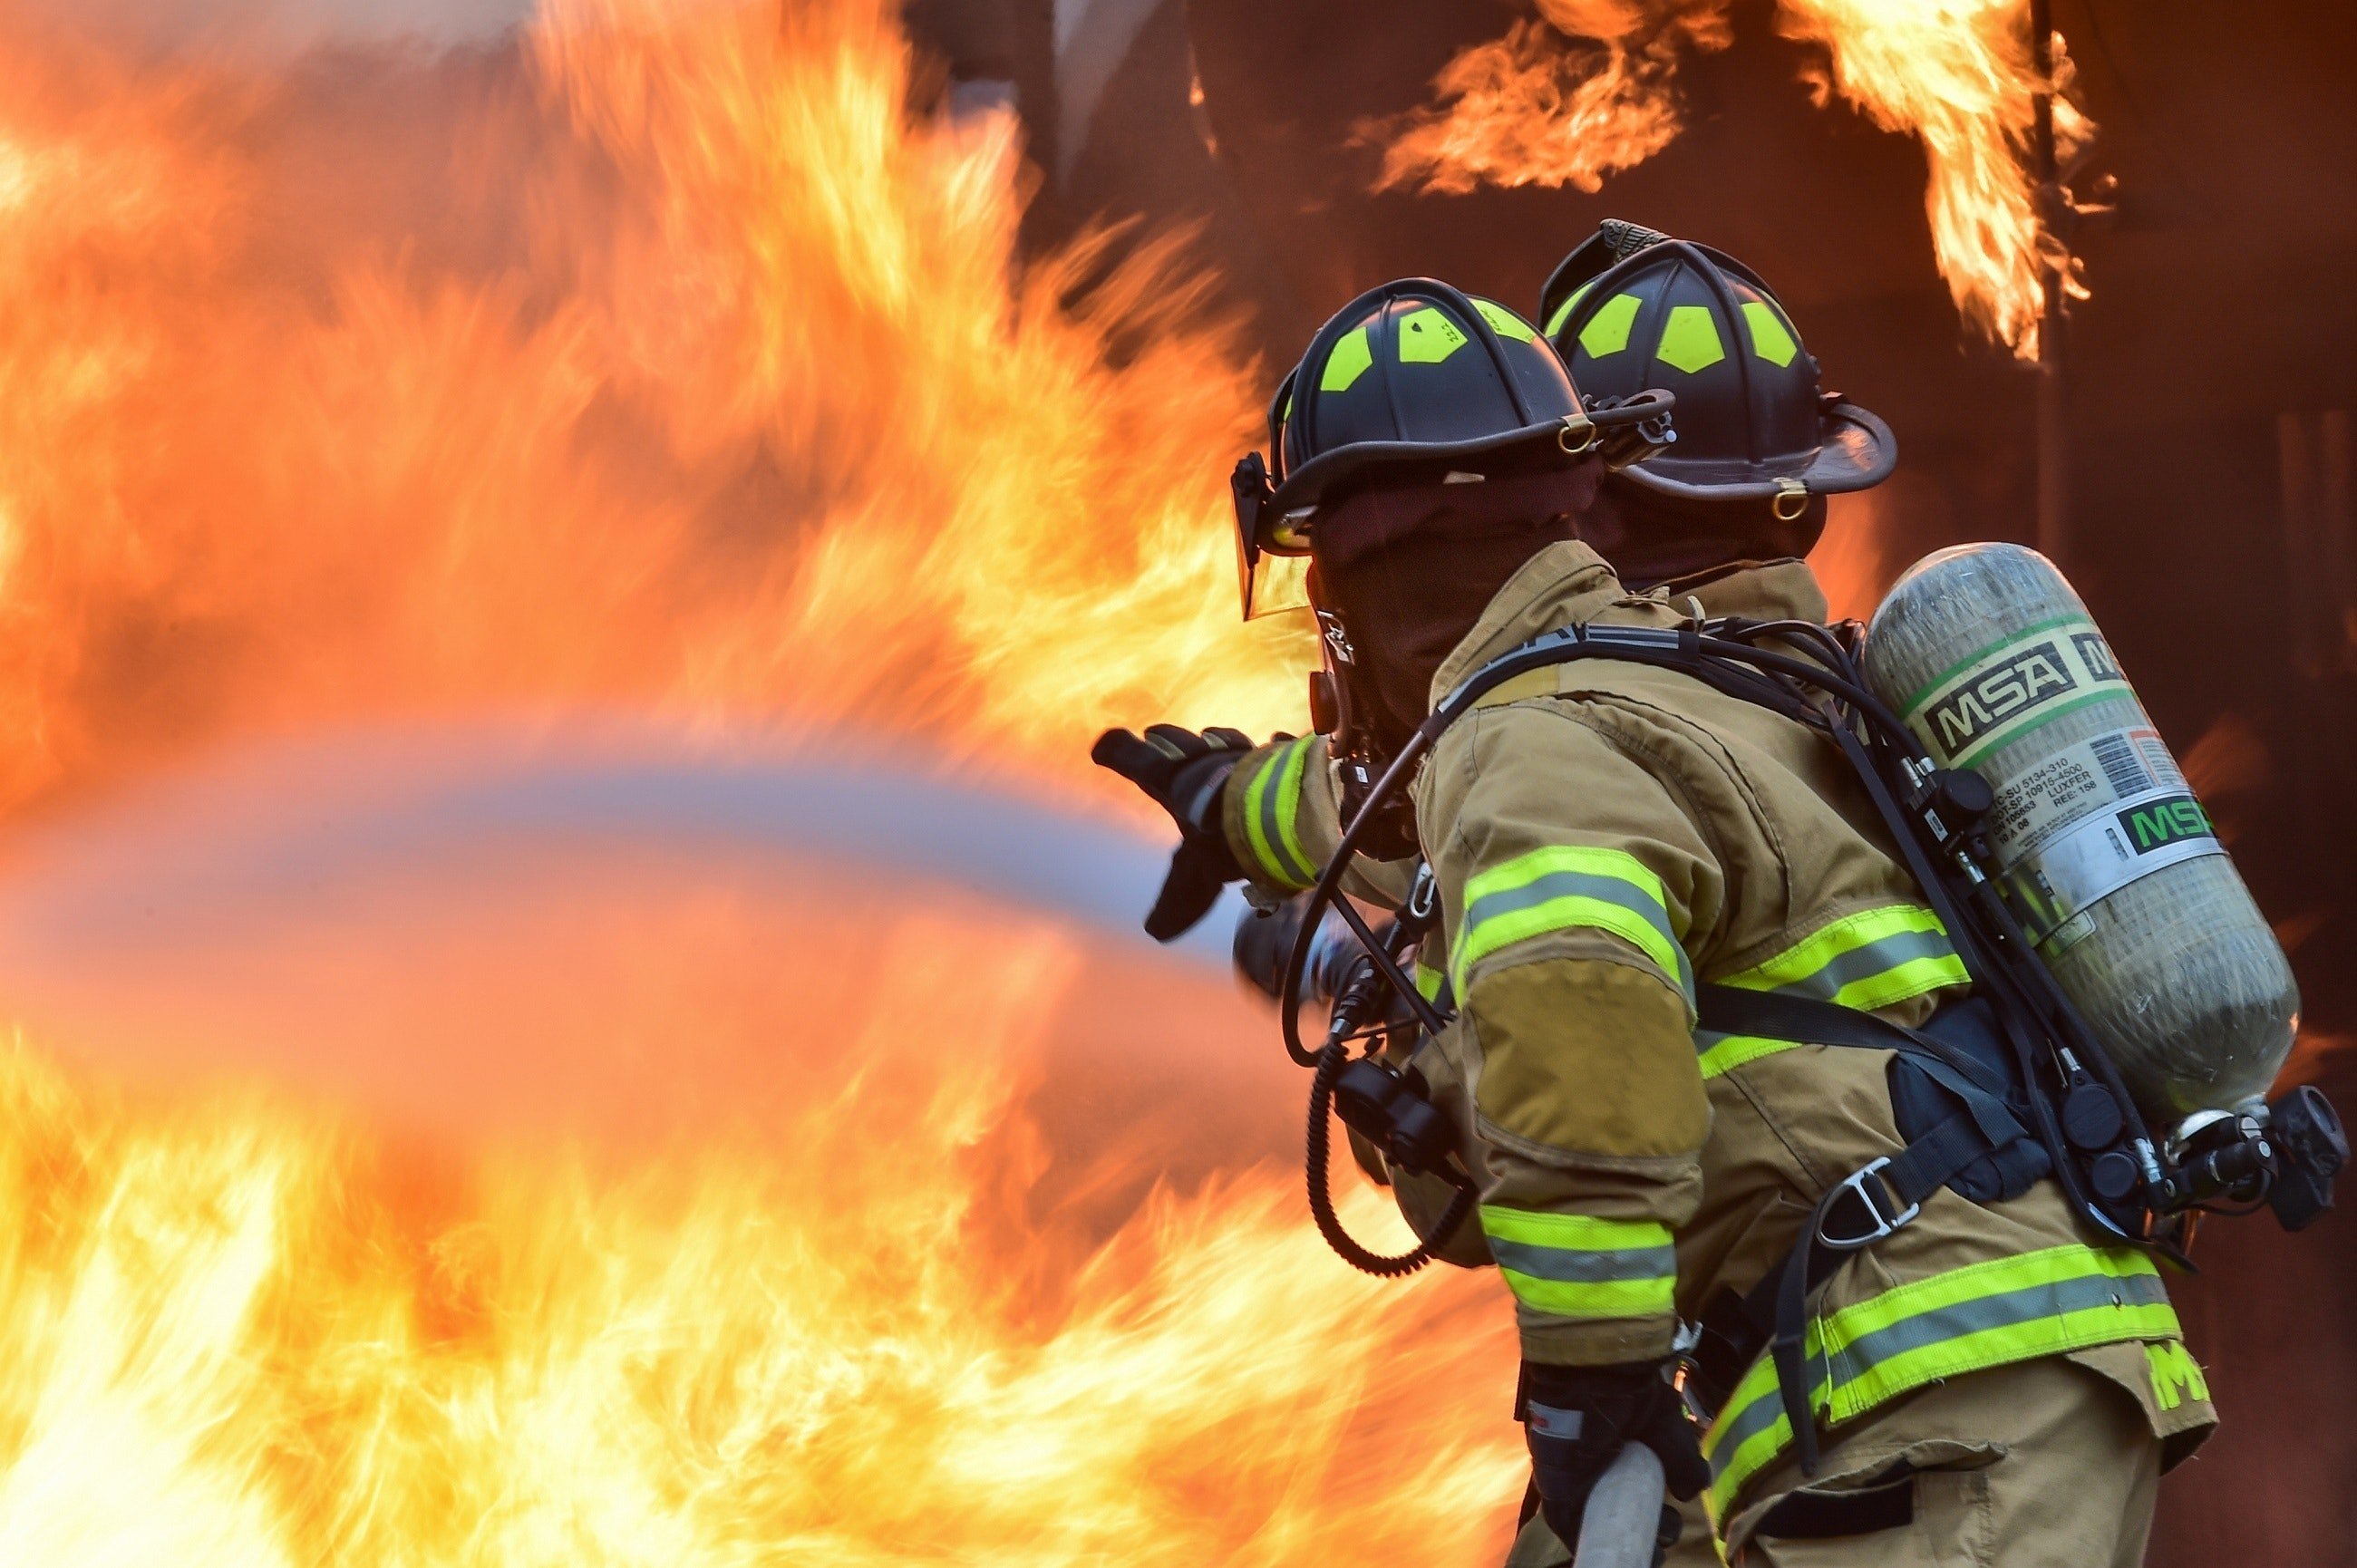 Fire fighters fighting a house fire. | Source: Pexels/ Pixabay